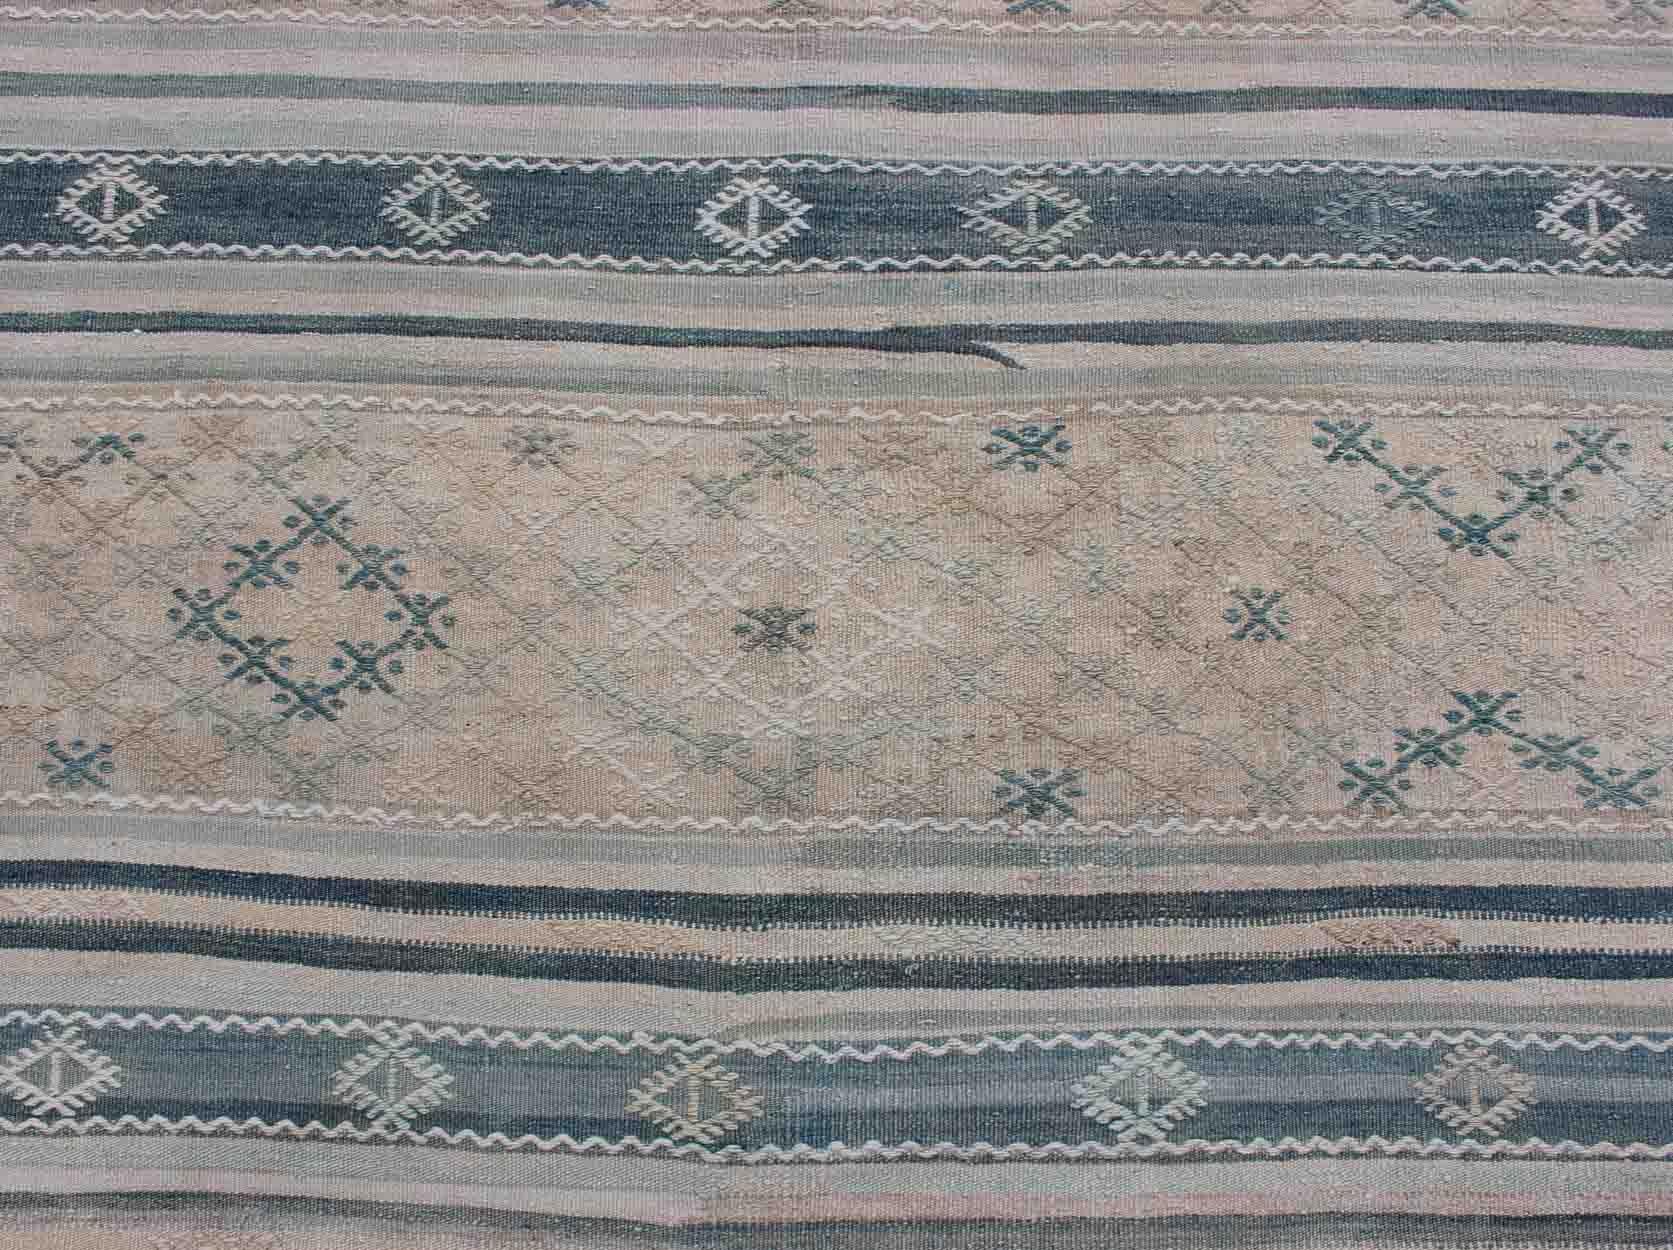 Wool Vintage Turkish Flat-Weave Kilim with Embroideries in Diamonds and Stripes